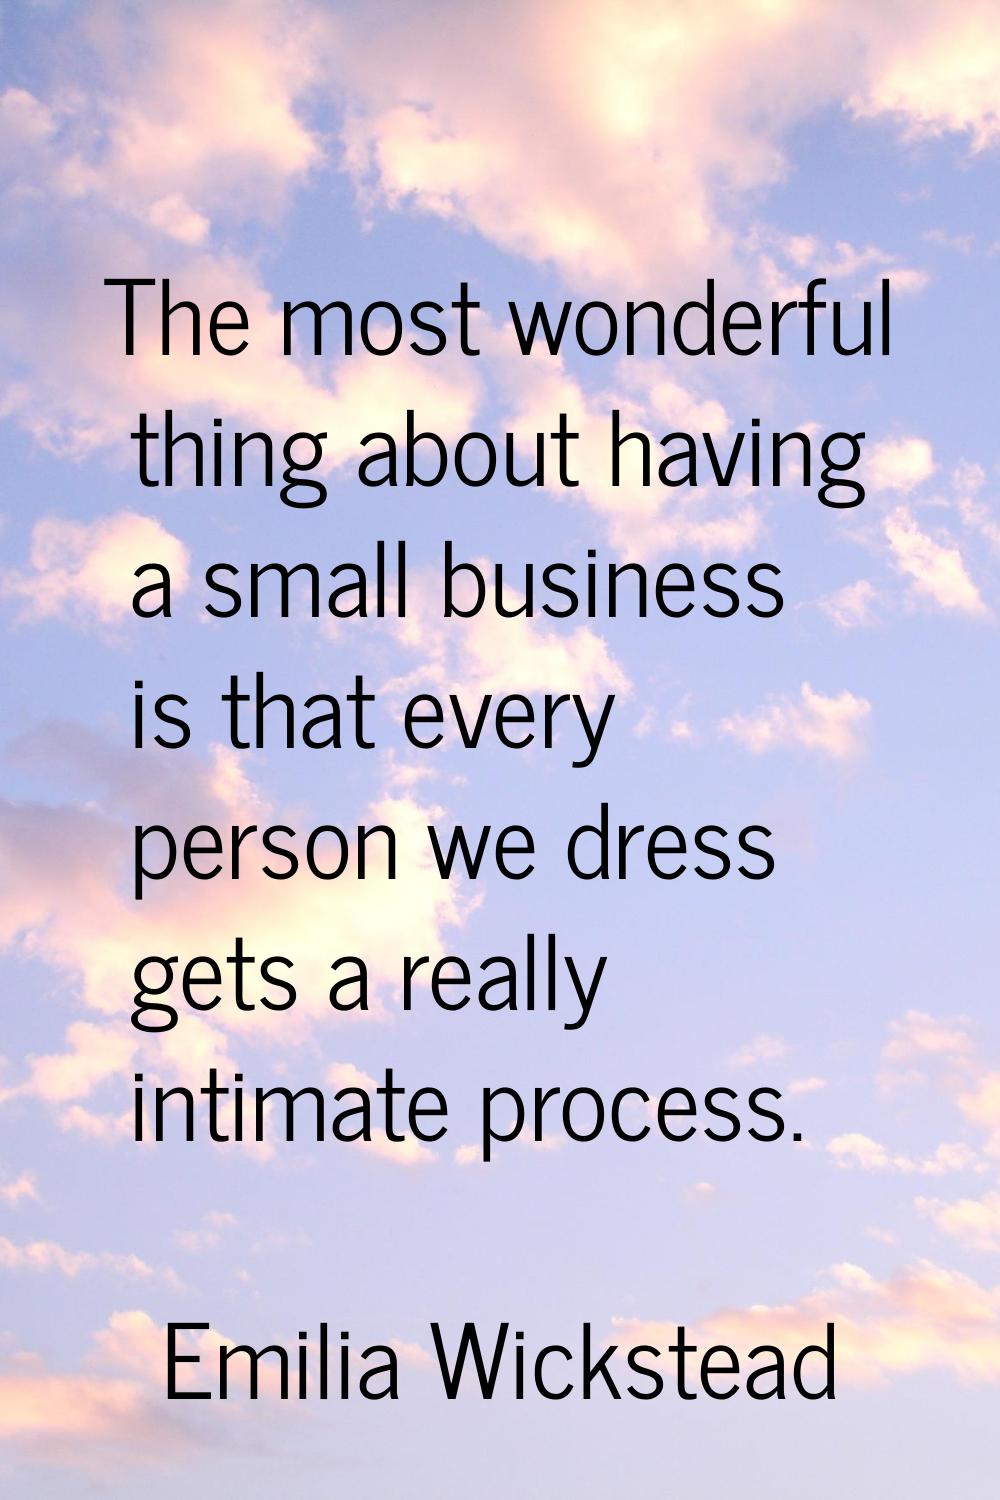 The most wonderful thing about having a small business is that every person we dress gets a really 